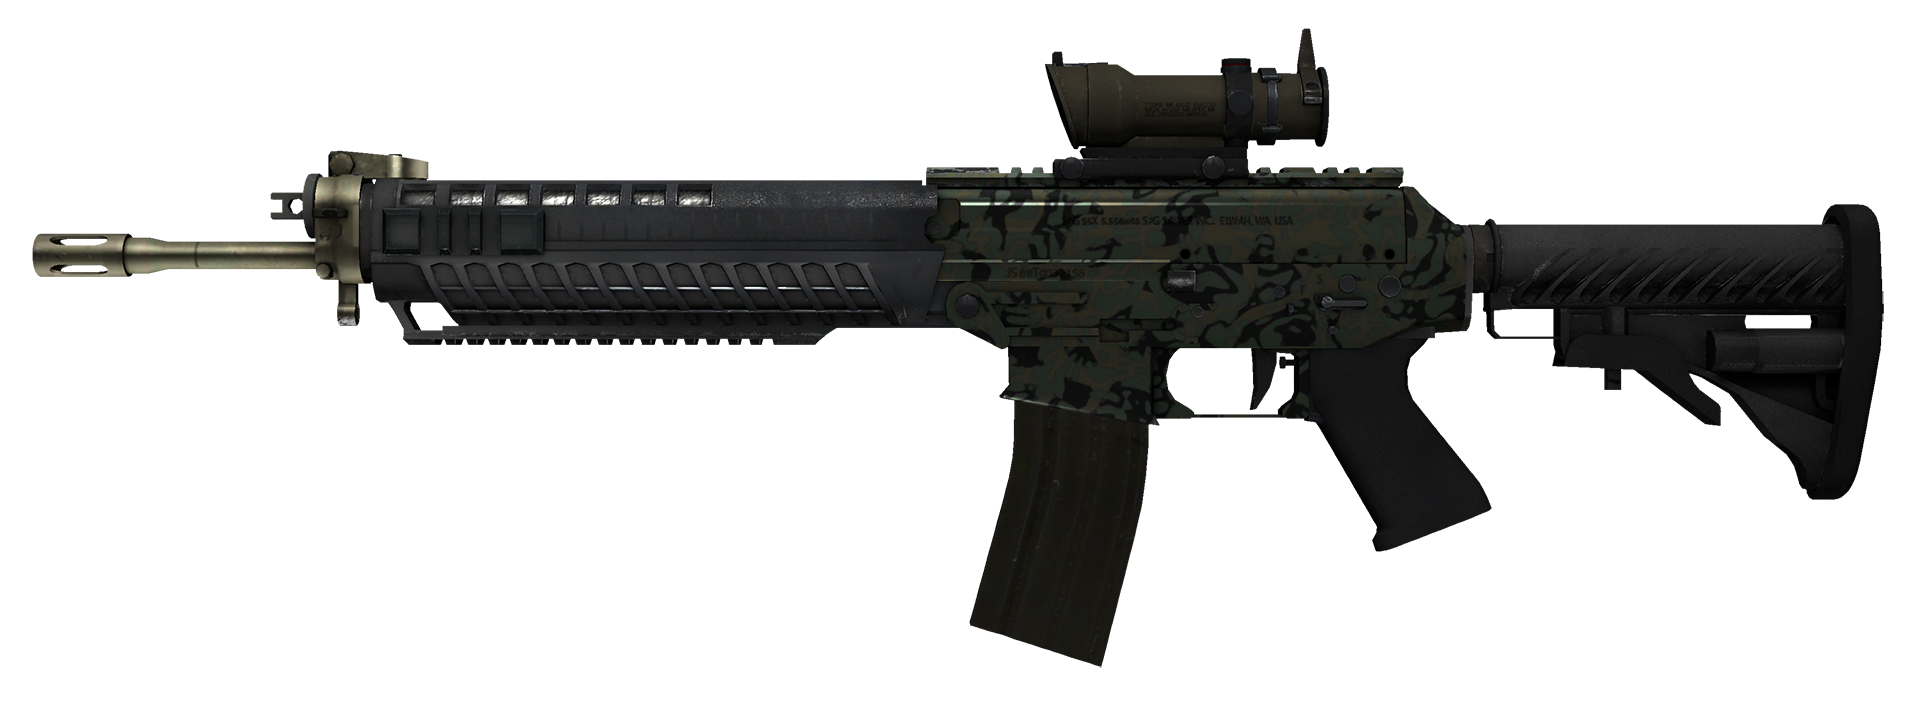 SG 553 Army Sheen Large Rendering